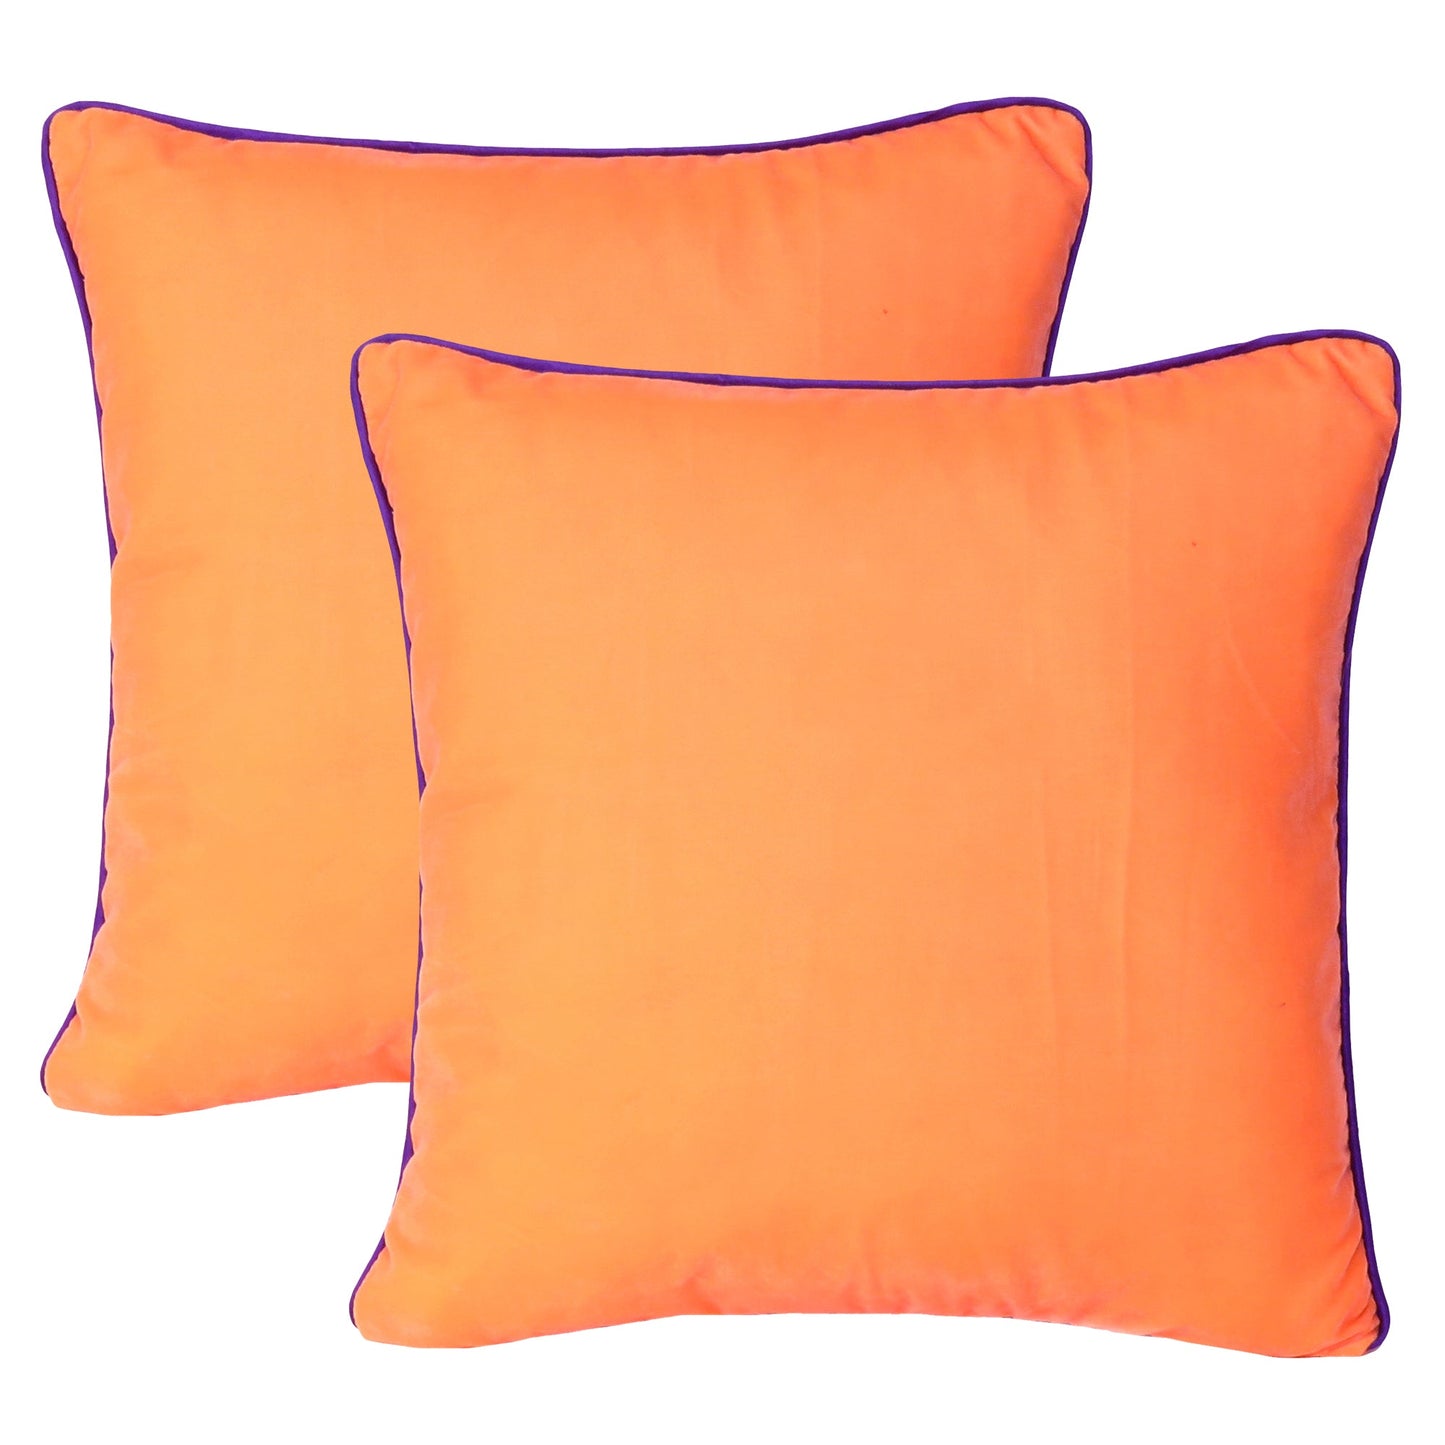 Orange Velvet Cushion Cover with Purple Piping Edge in Set of 2